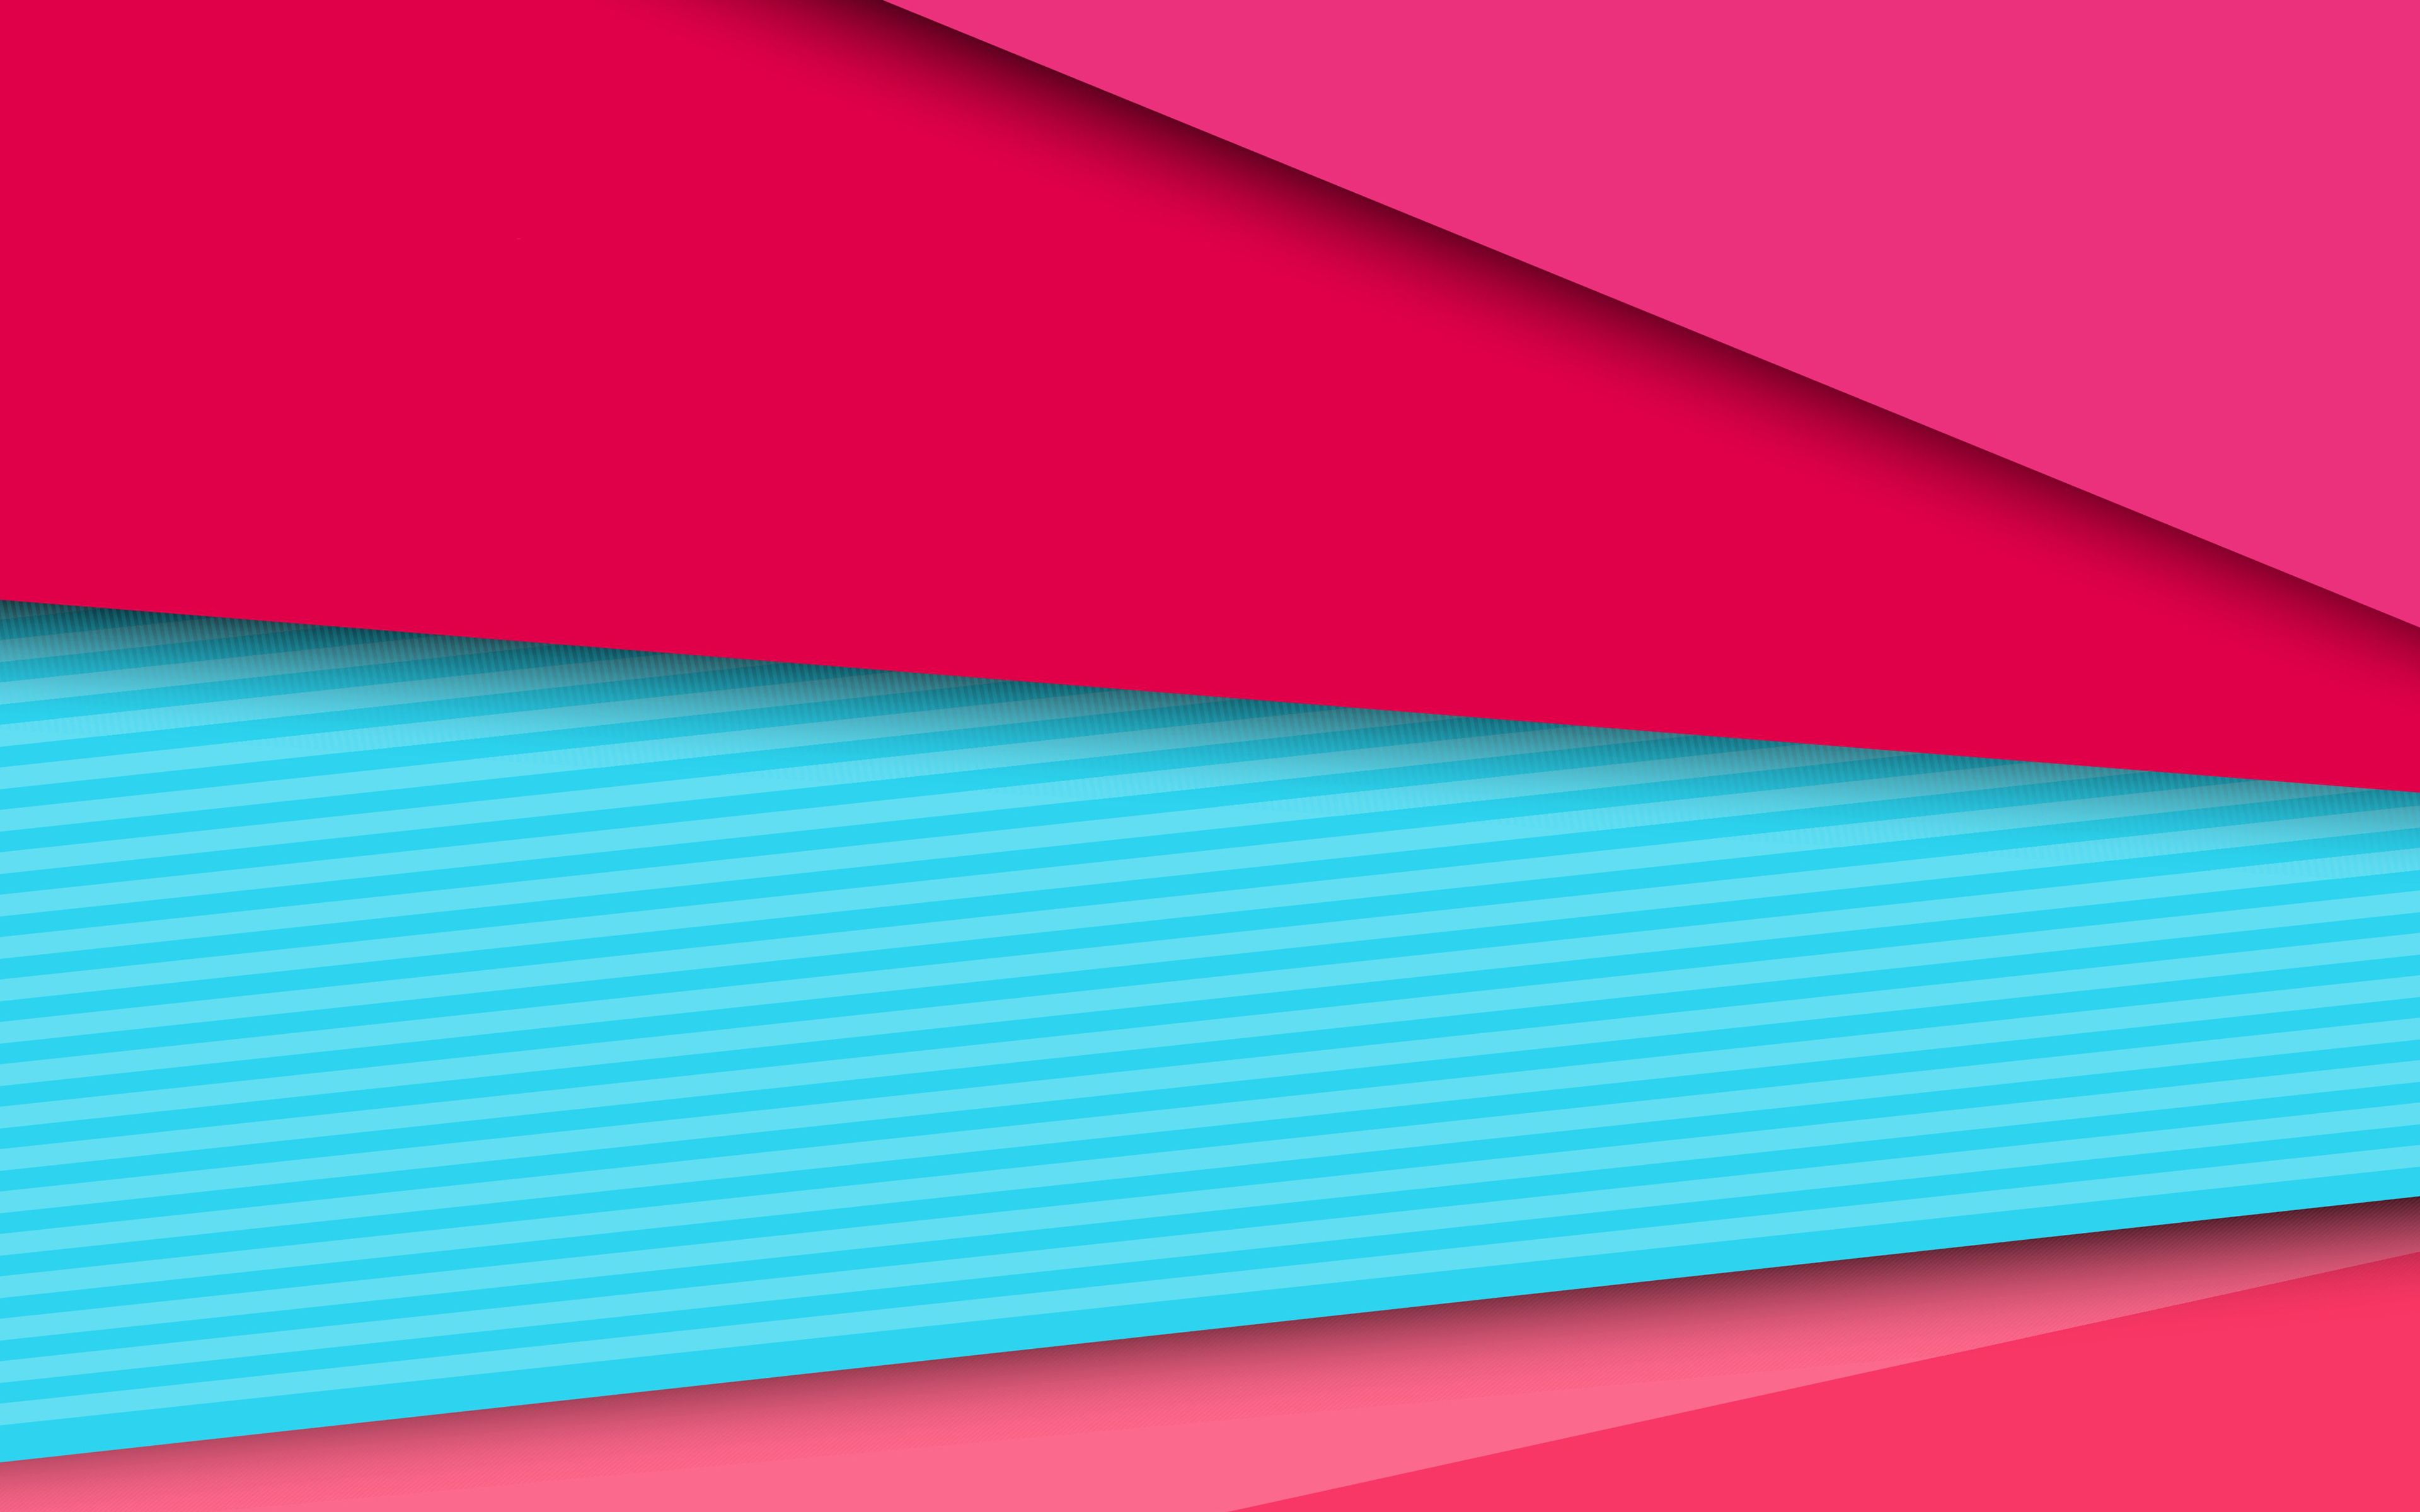 Download wallpaper 4k, material design, pink and blue, creative, geometric shapes, lines, lollipop, geometry, strips, colorful background, abstract art for desktop with resolution 3840x2400. High Quality HD picture wallpaper